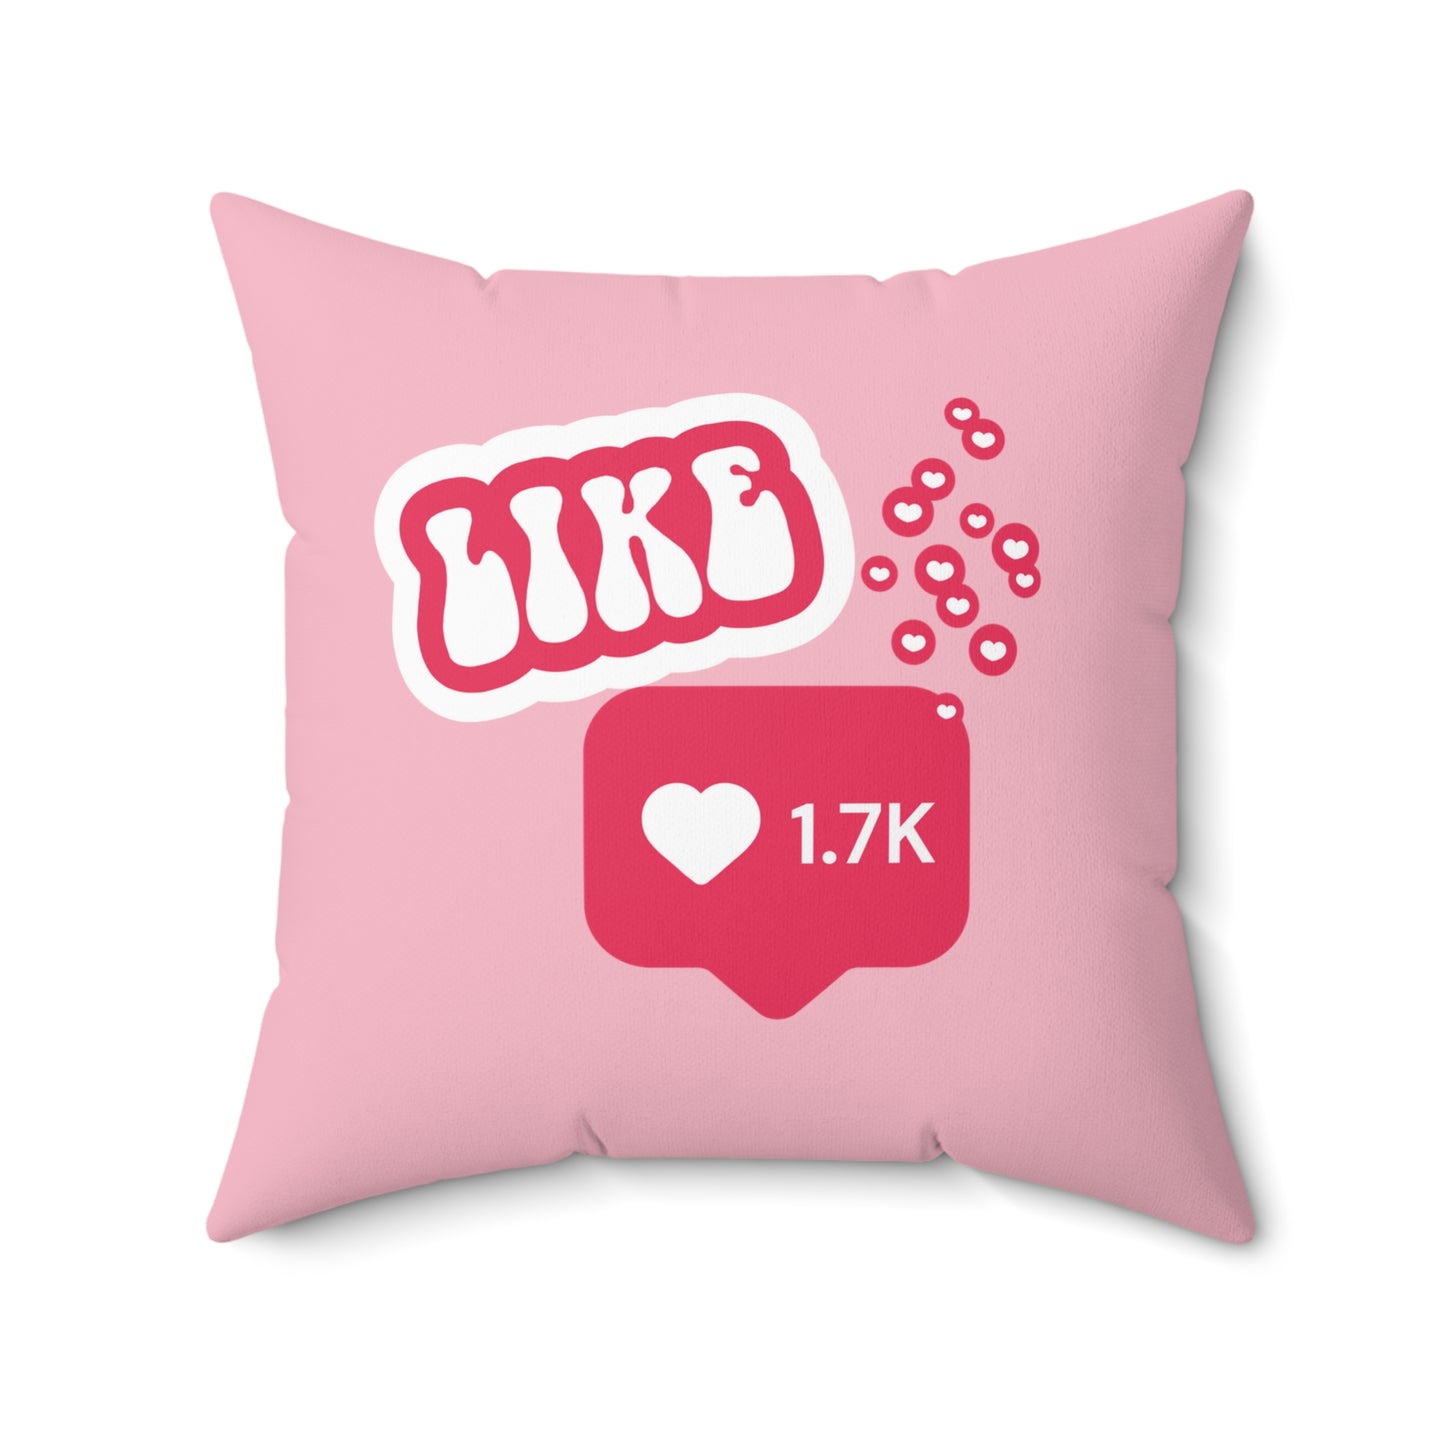 Doing It For Likes Square Pillow - Pink